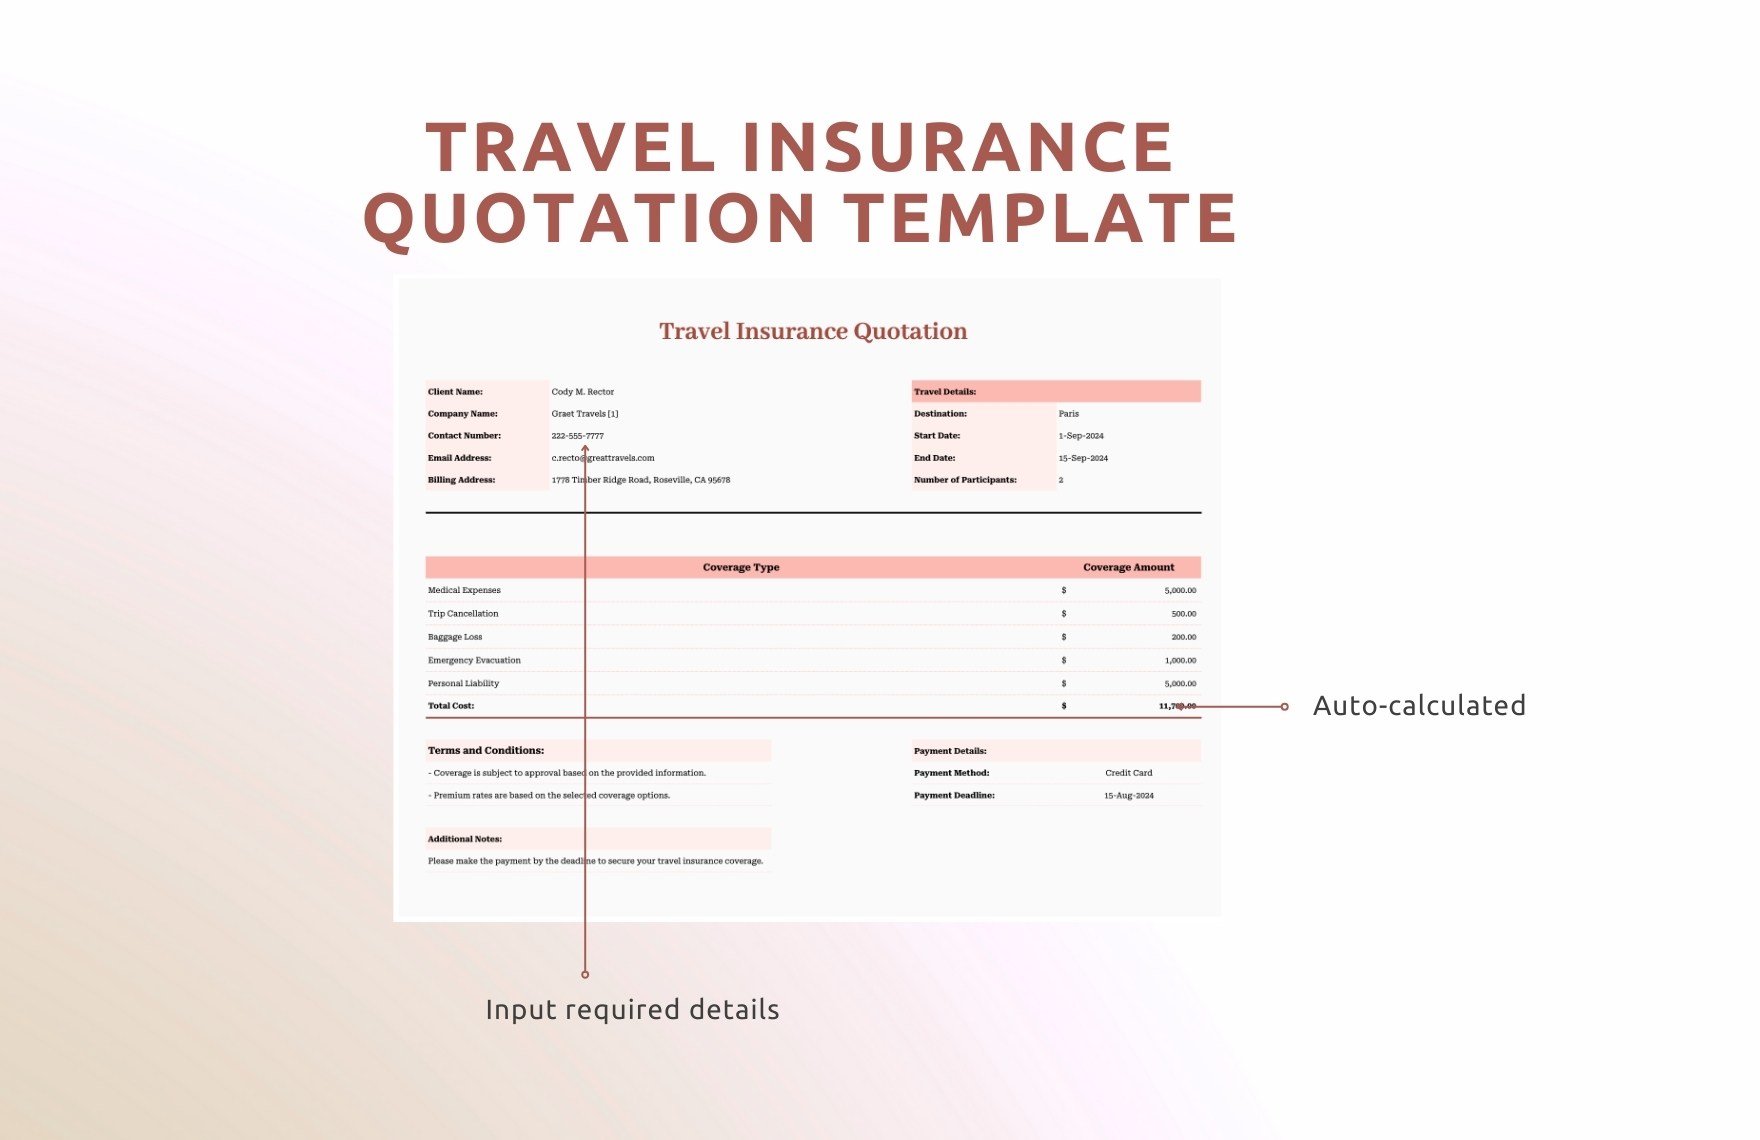 Travel Insurance Quotation Template